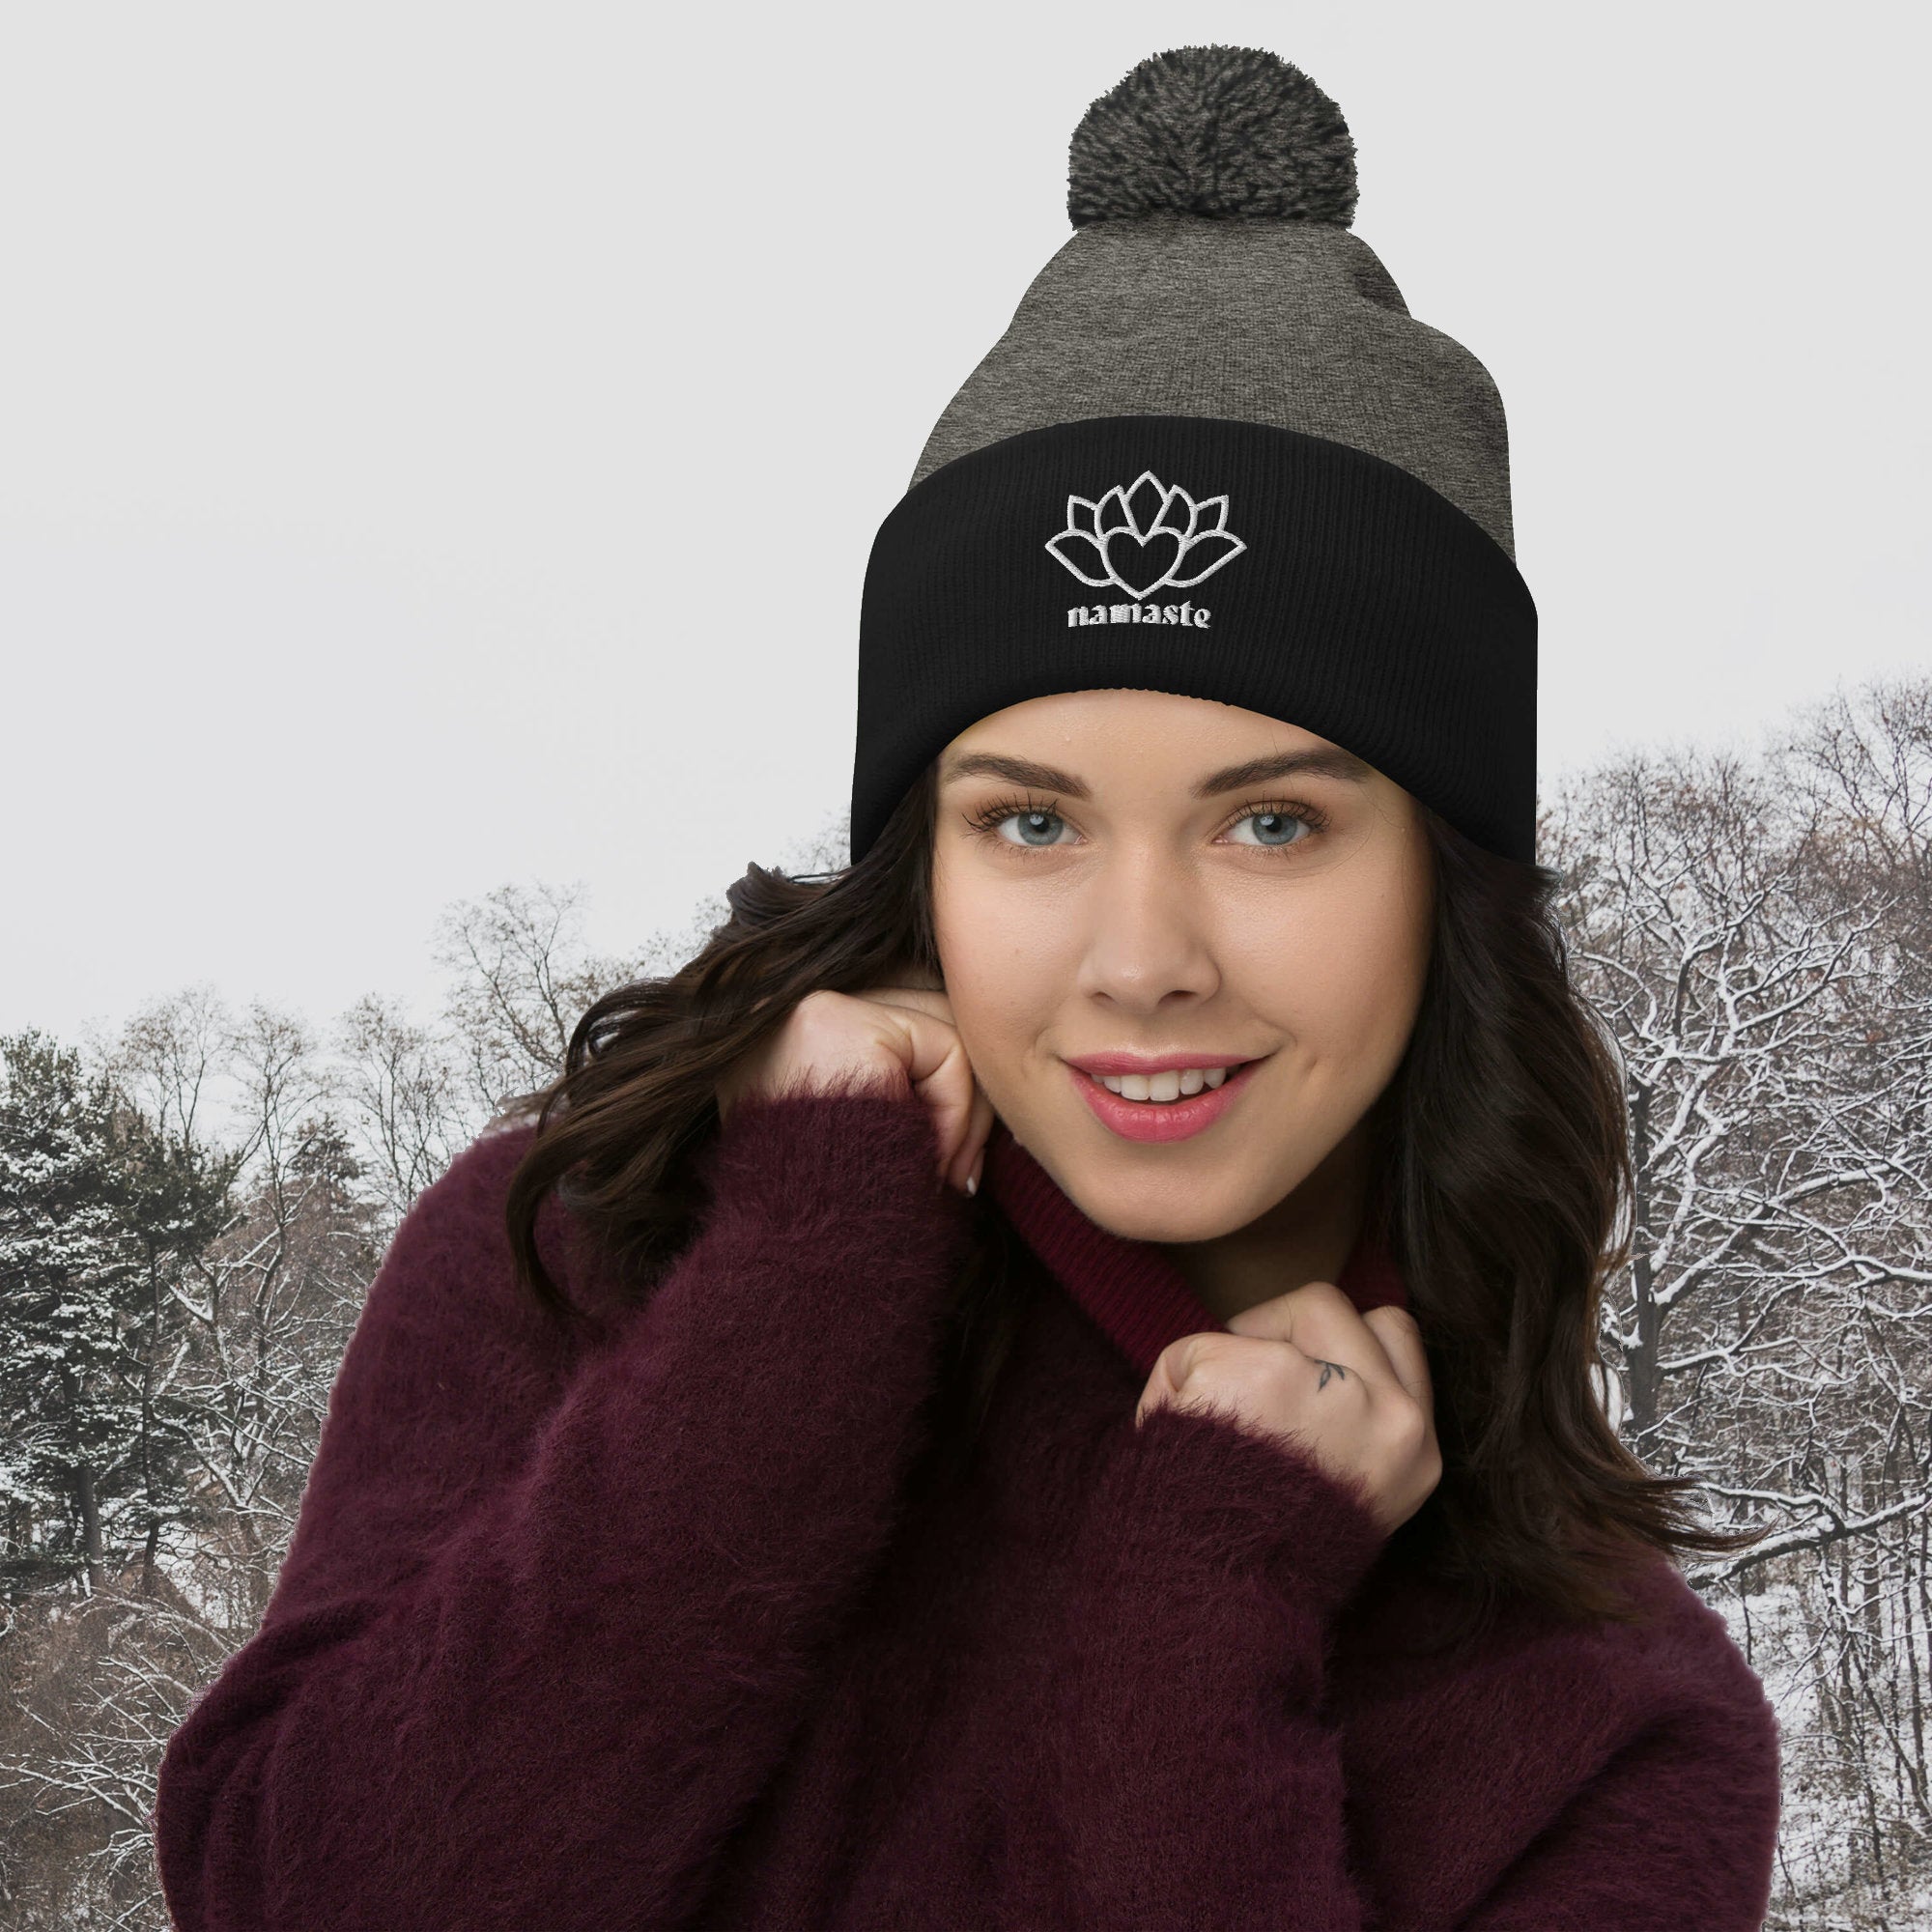 Shop for hats and beanies on https://ascensionemporium.net